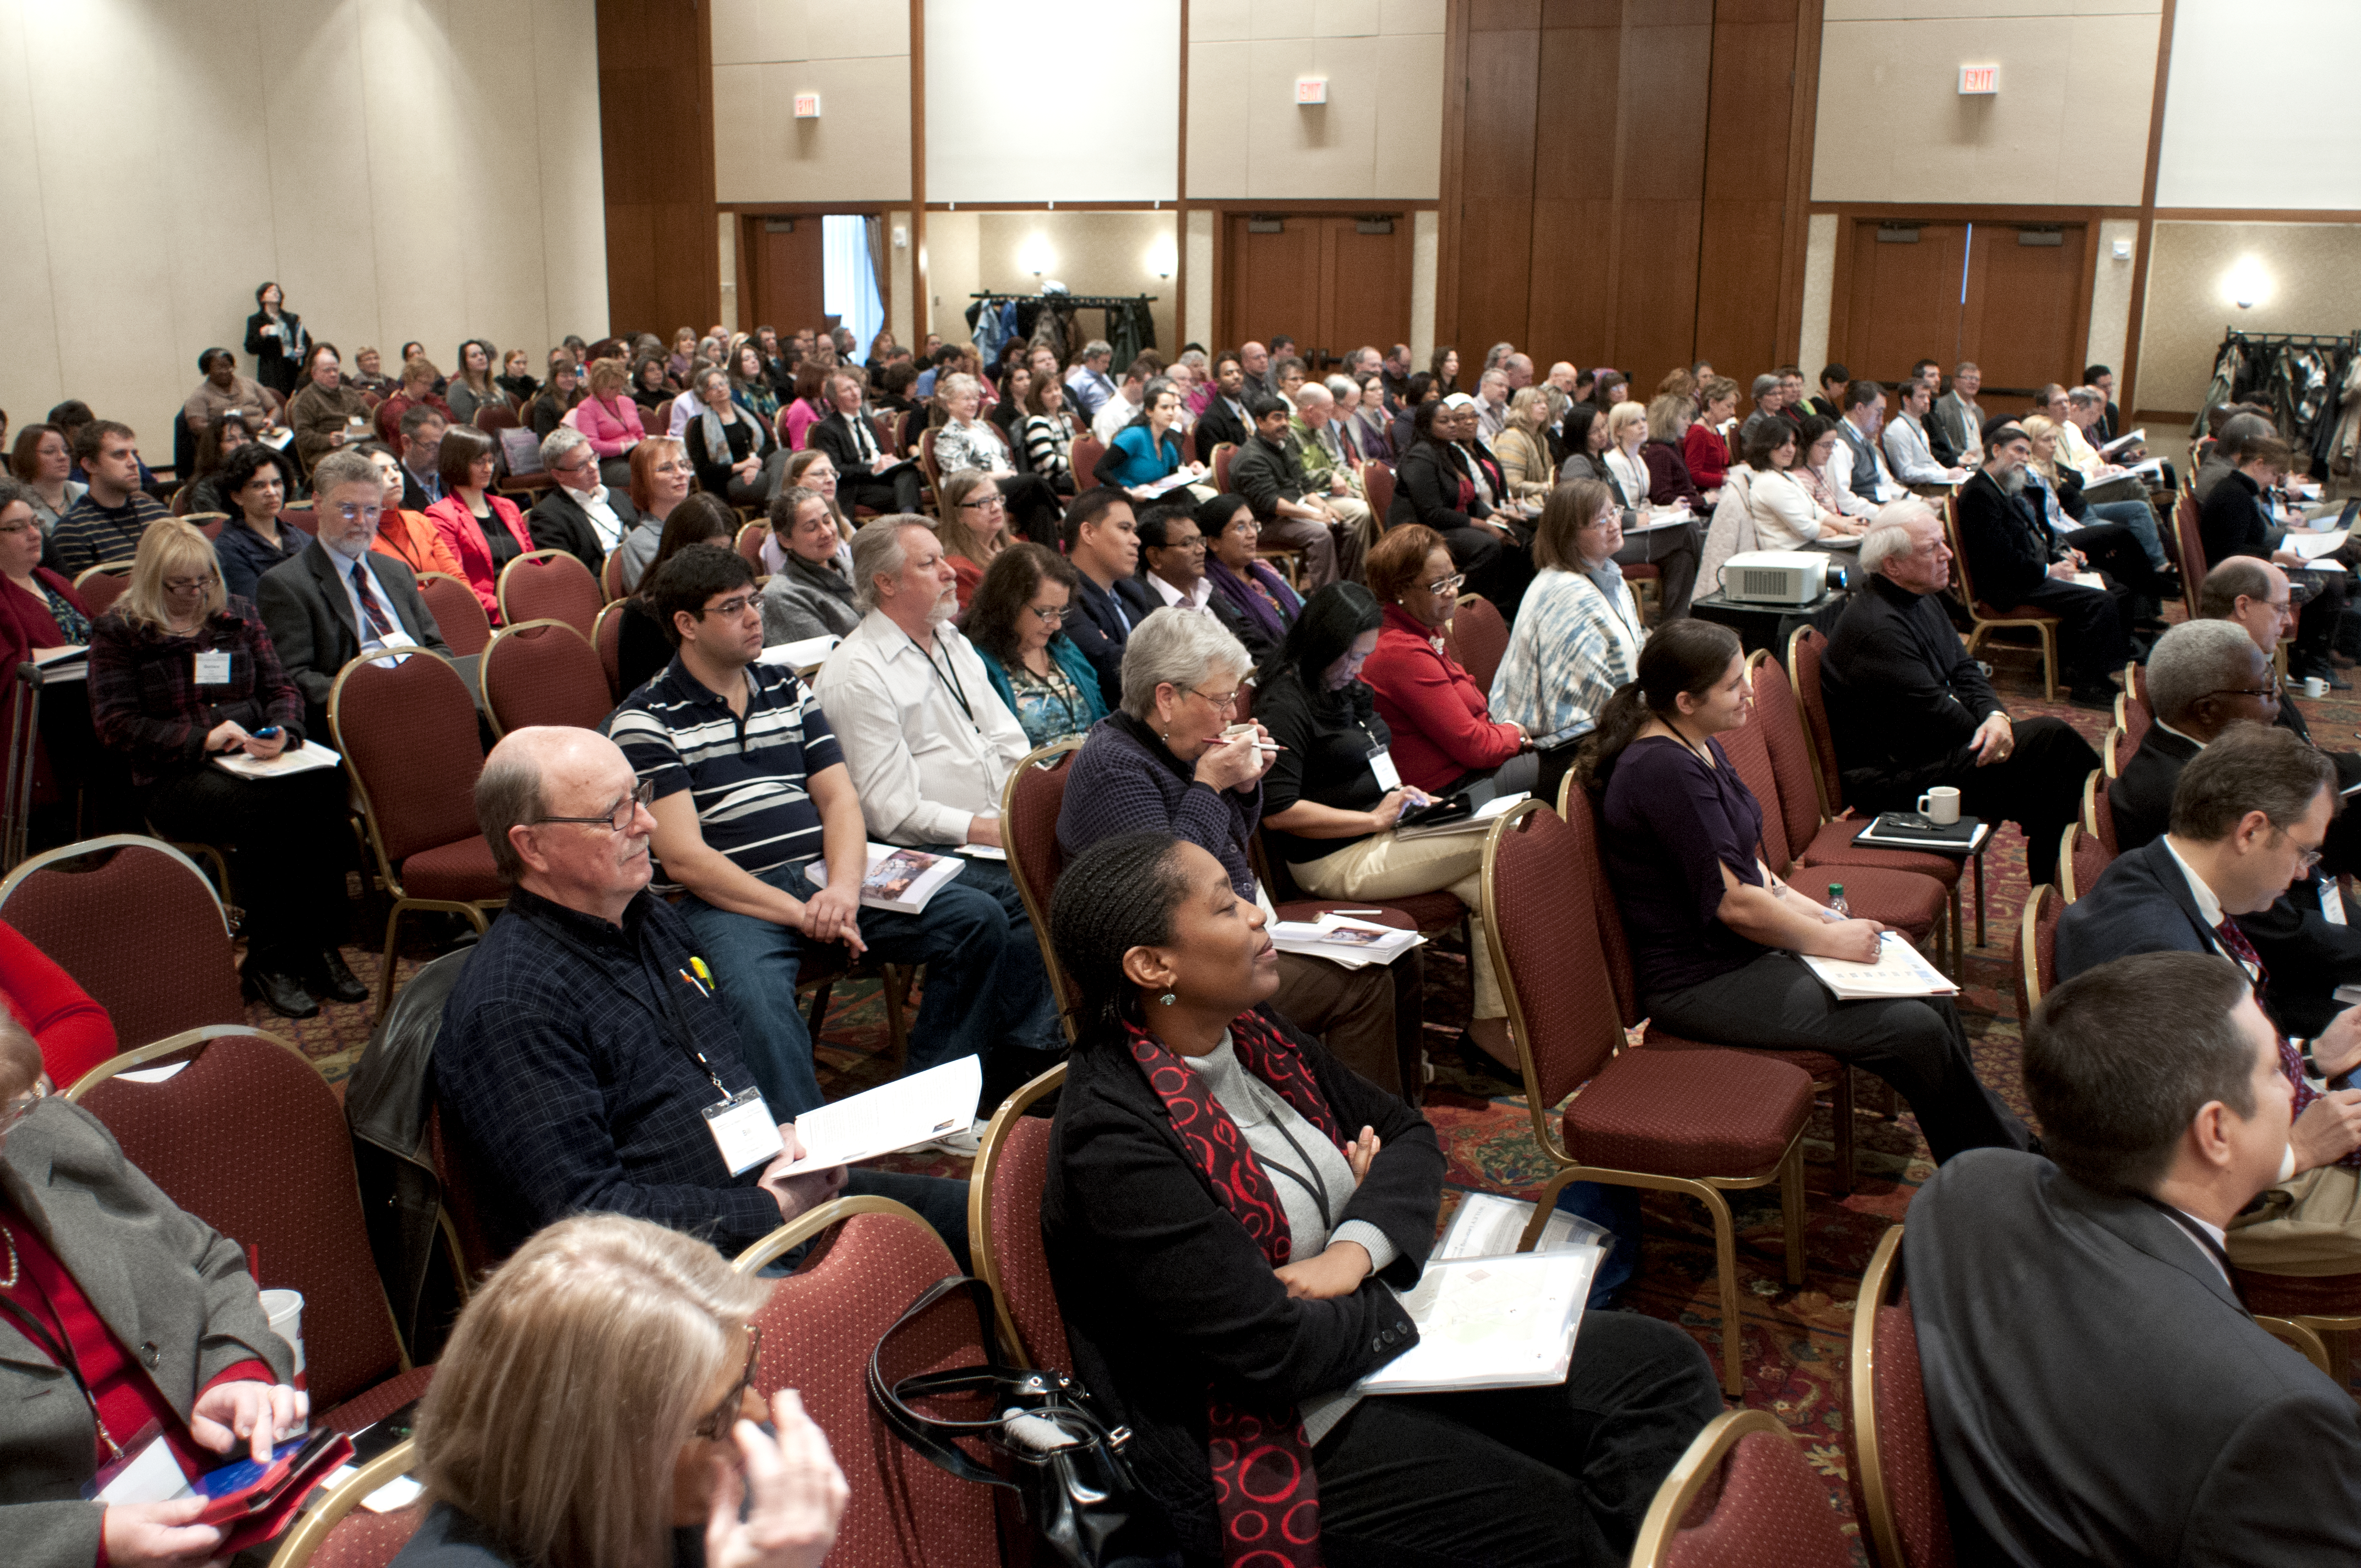 Attendees at the 2012 Conference on Higher Education Pedagogy.